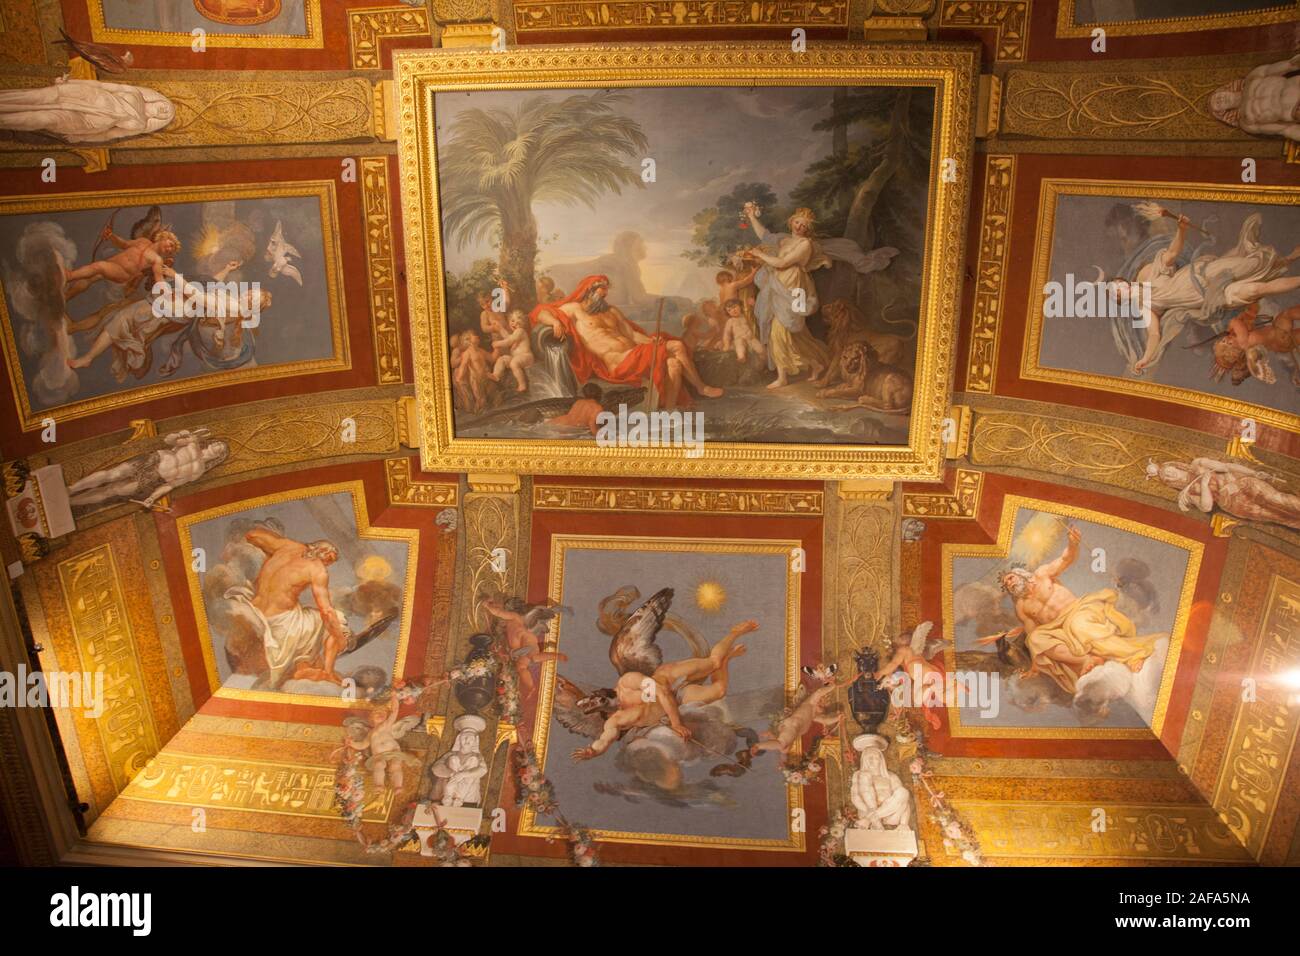 Painted ceiling frescos inside the Galleria Borghese (Borghese Gallery), Rome Stock Photo